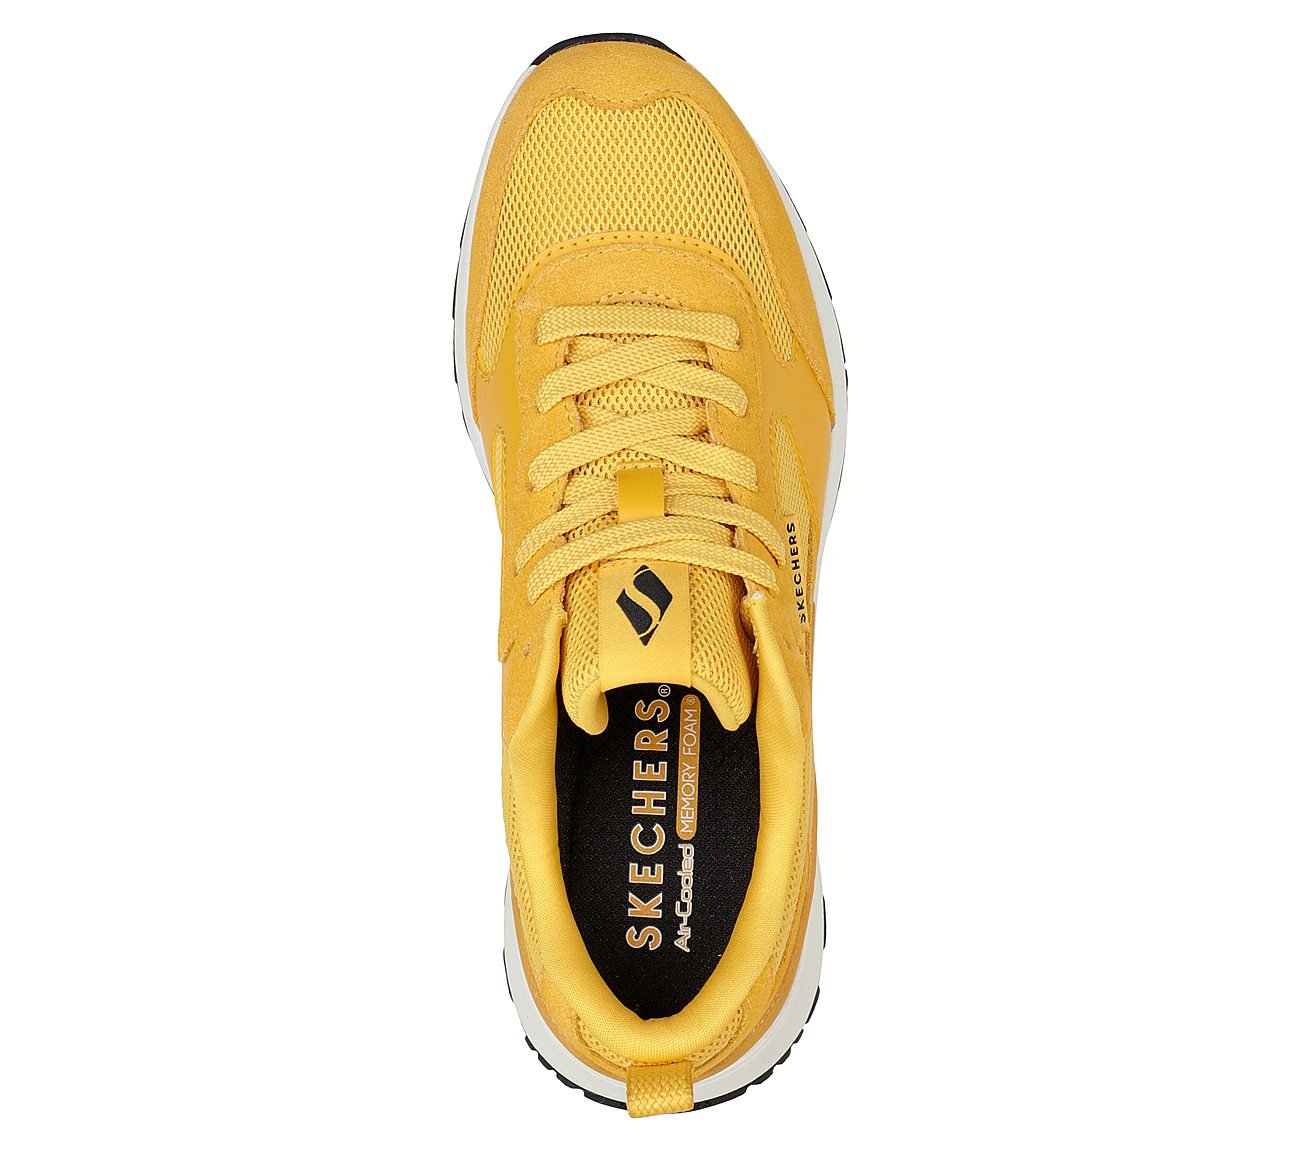 SUNNY STREET - PRIMARY'S, YELLOW Footwear Top View